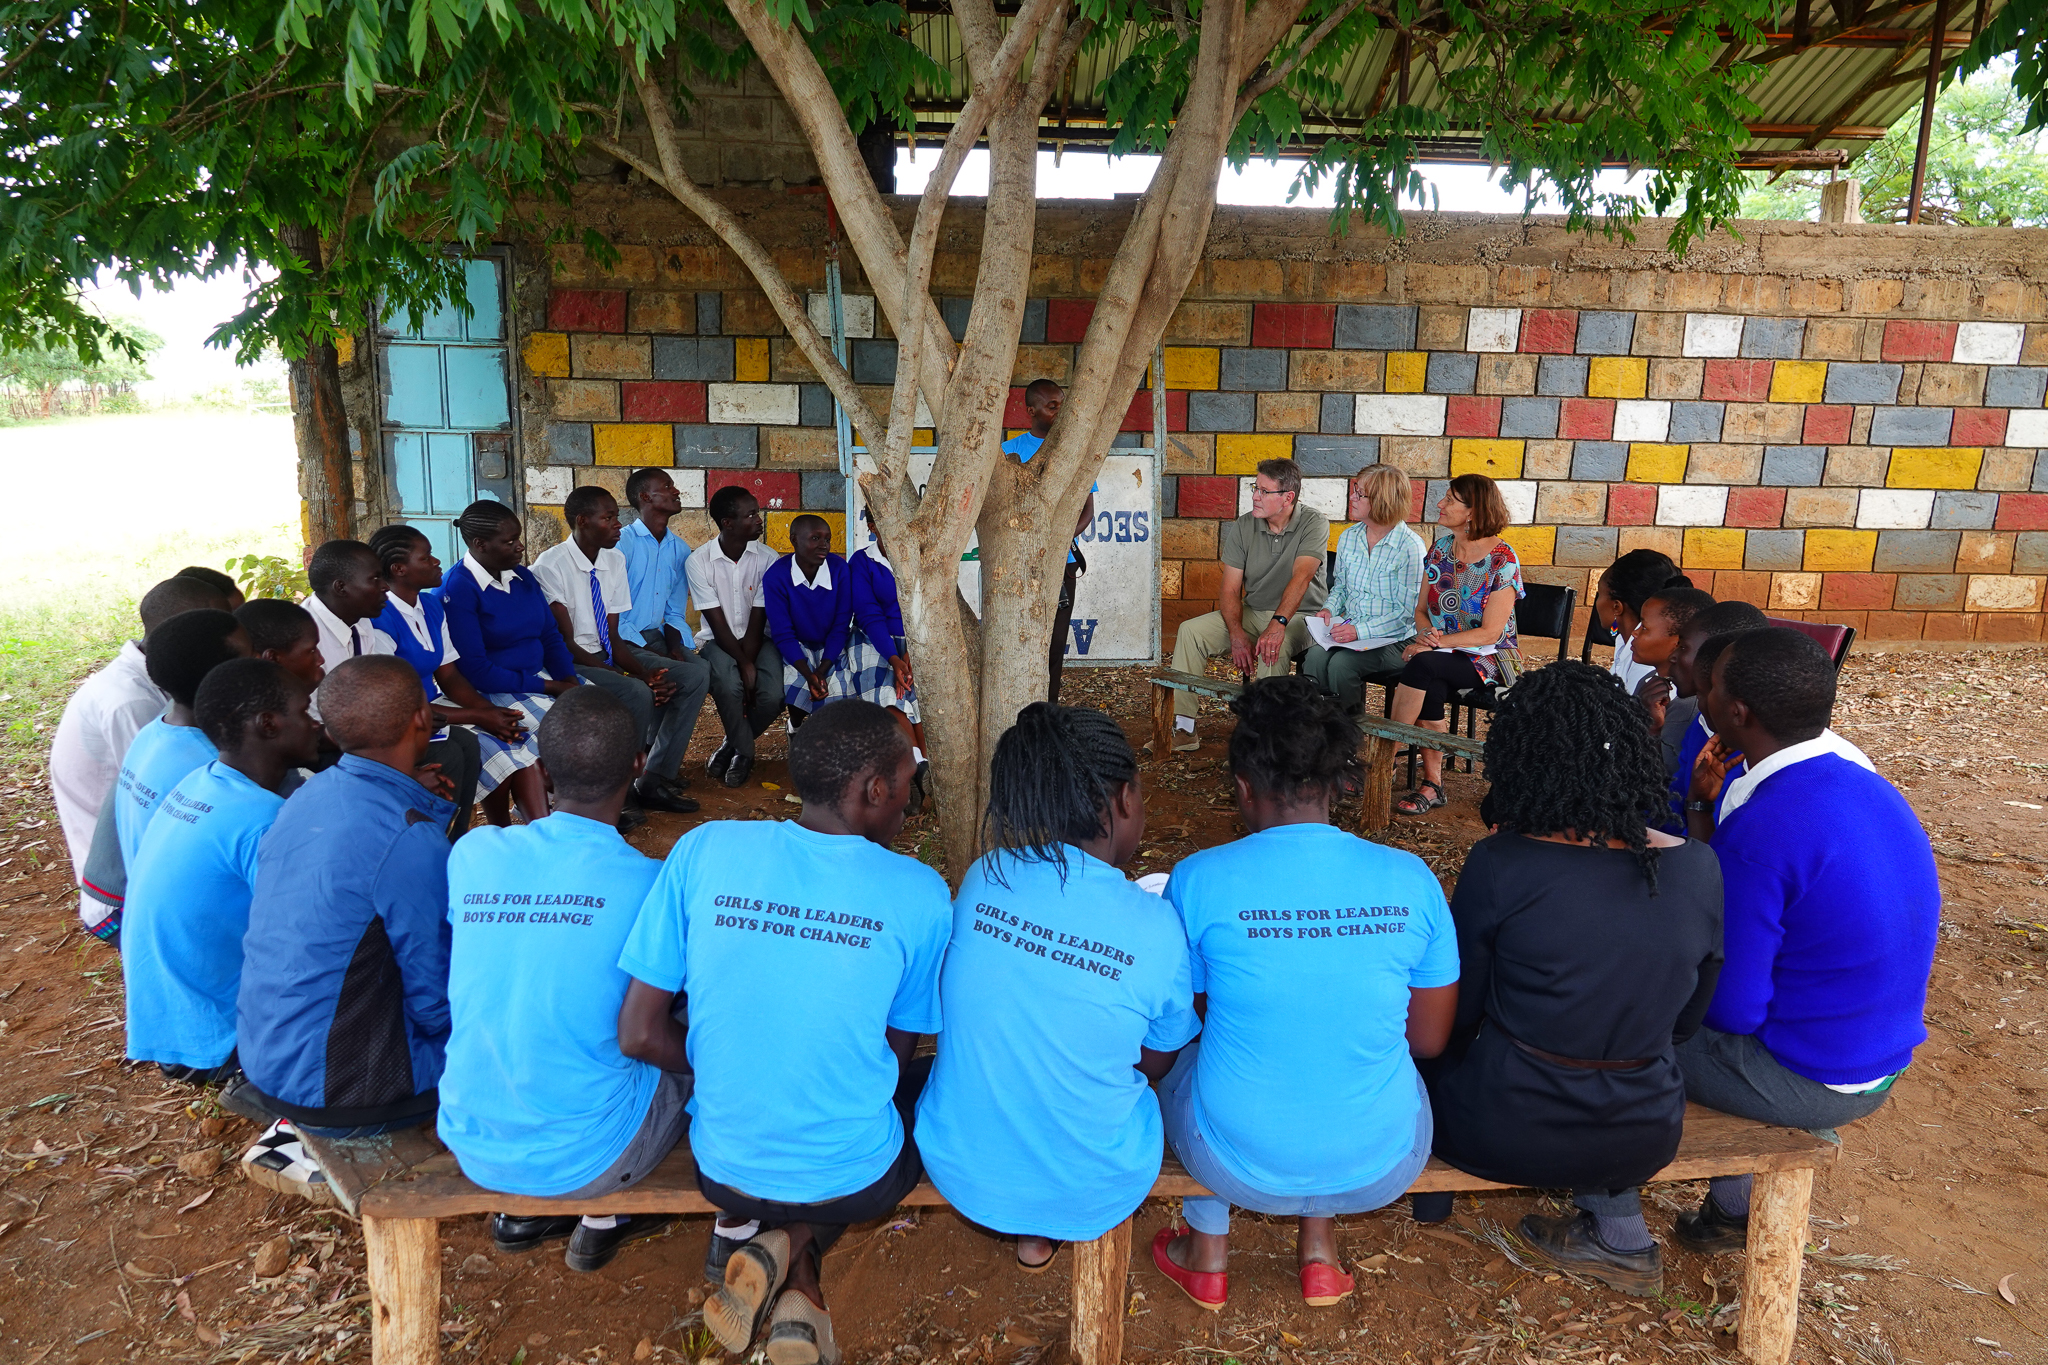 members site in a circle outdoors around a tree and hear from students from the girls for leaders program in Kenya.